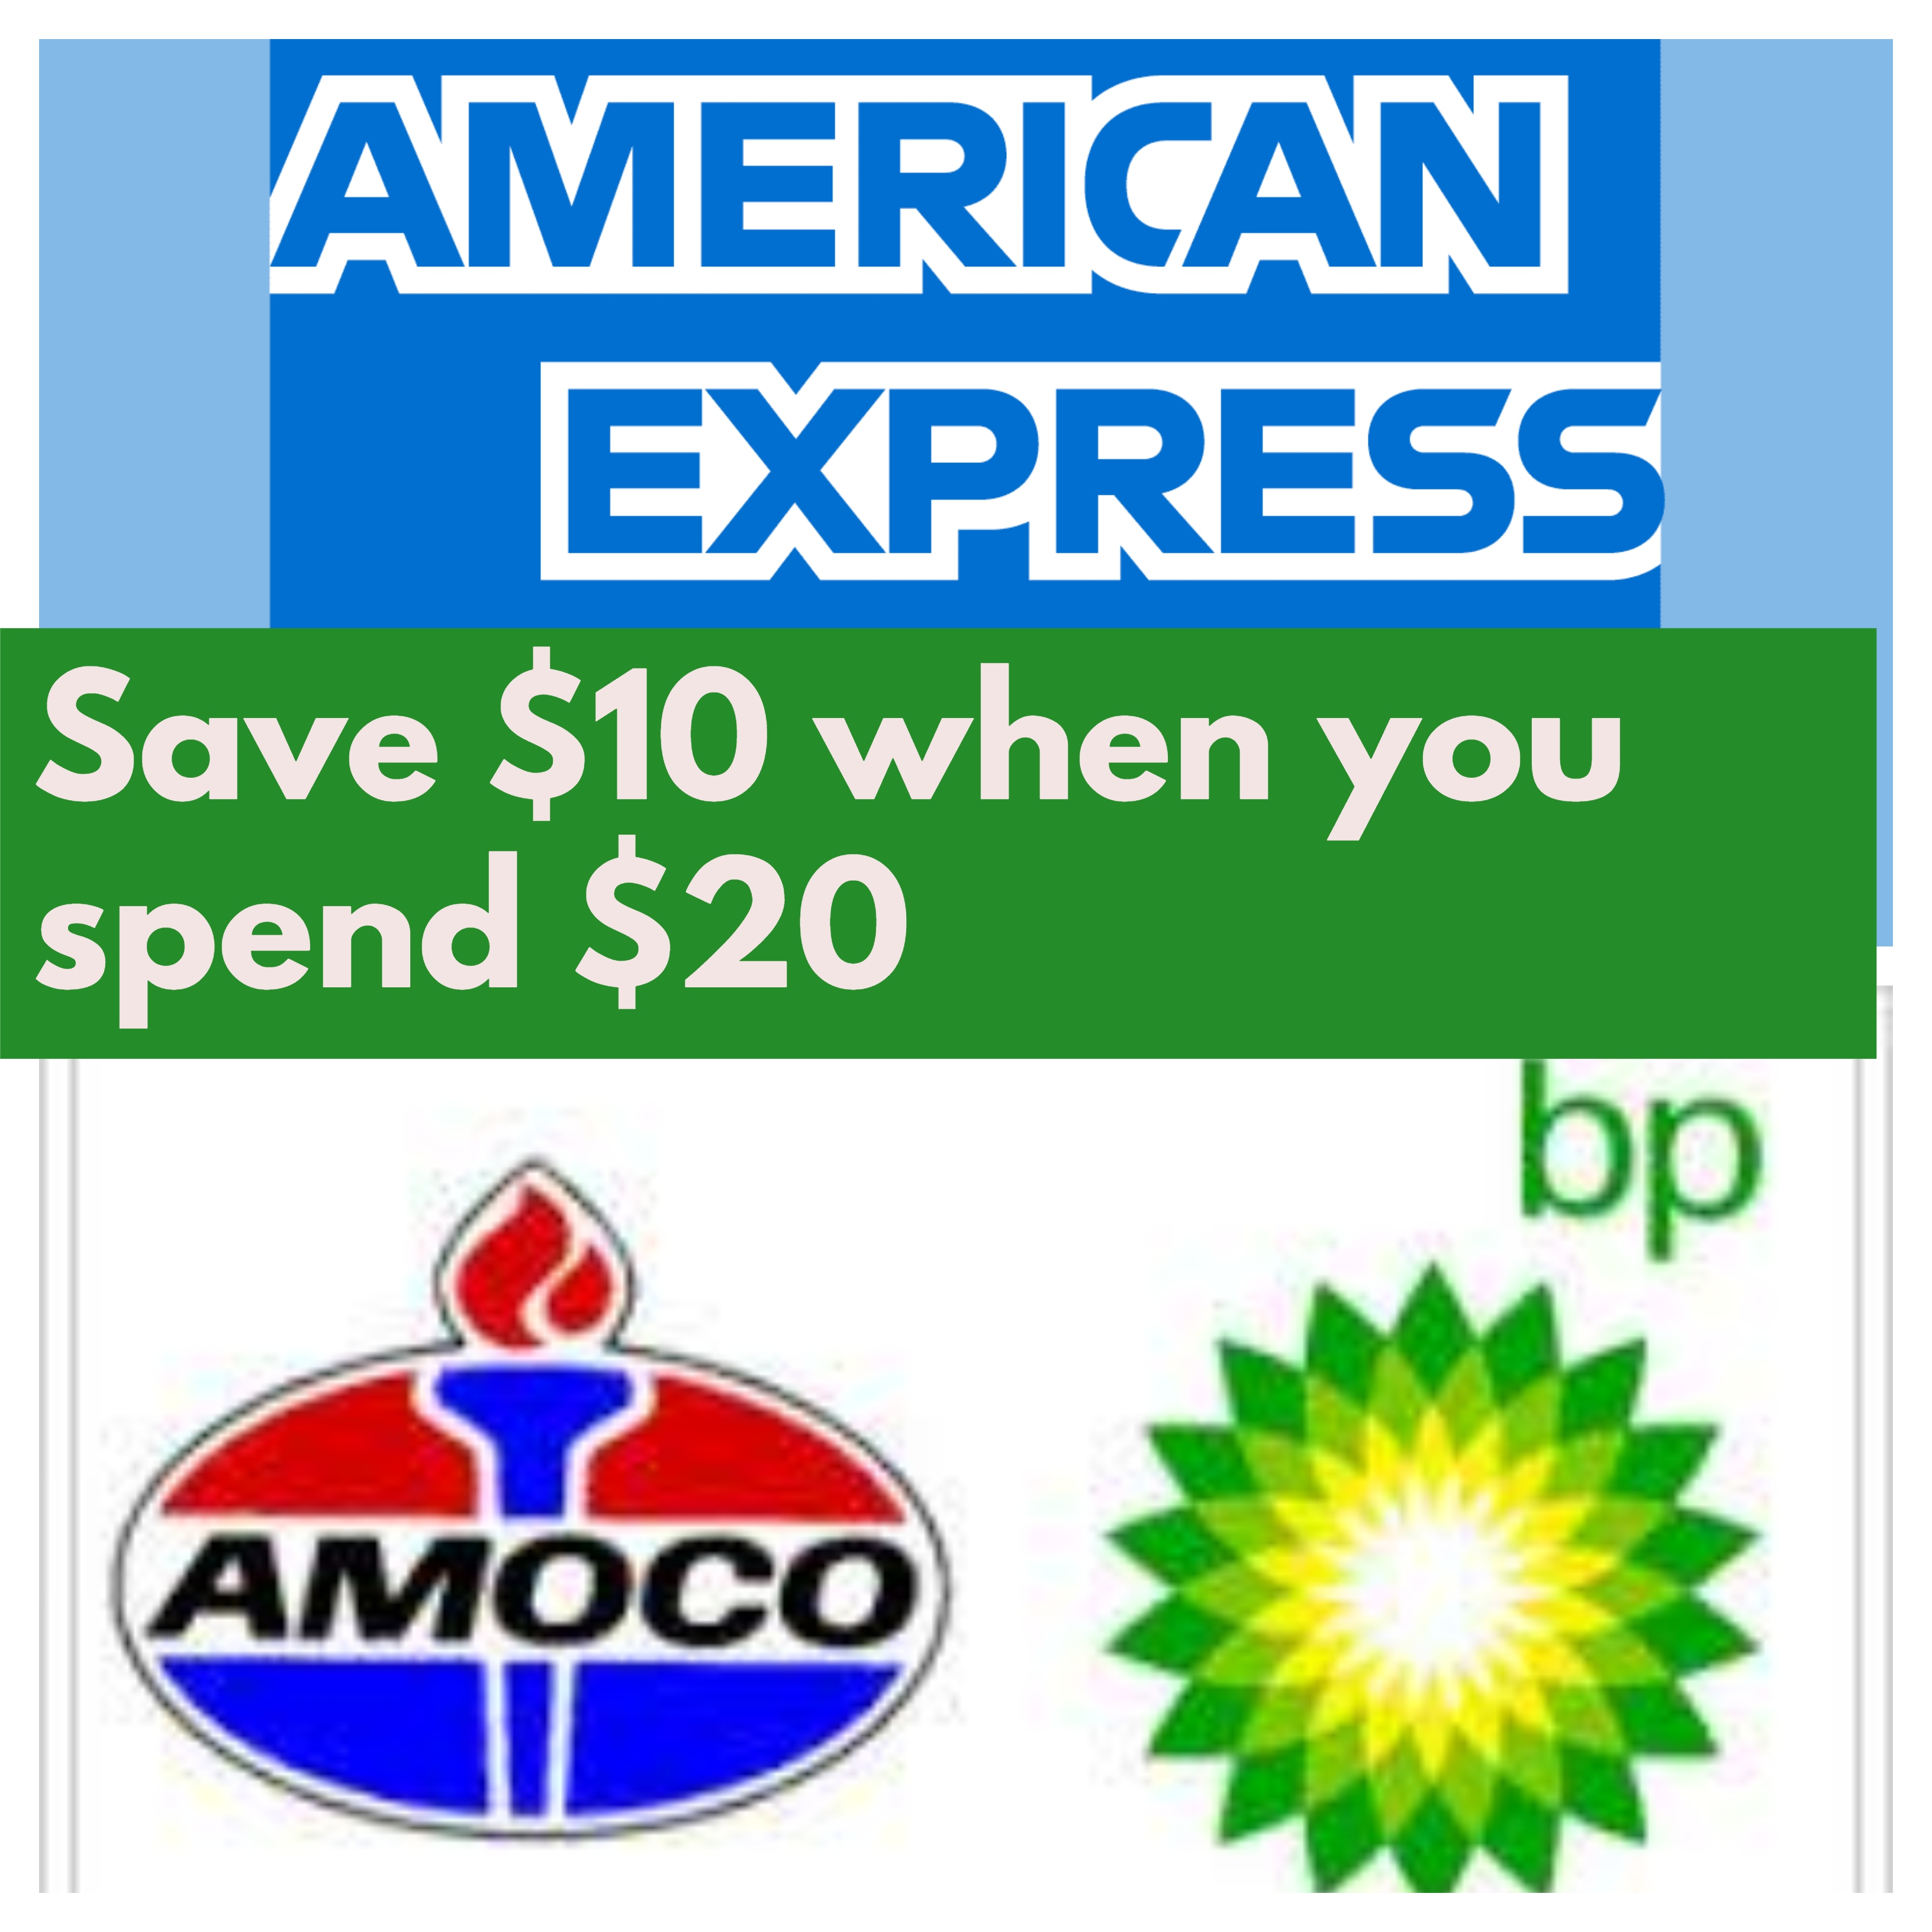 Save $10 when you spend $20+ at BP or Amoco